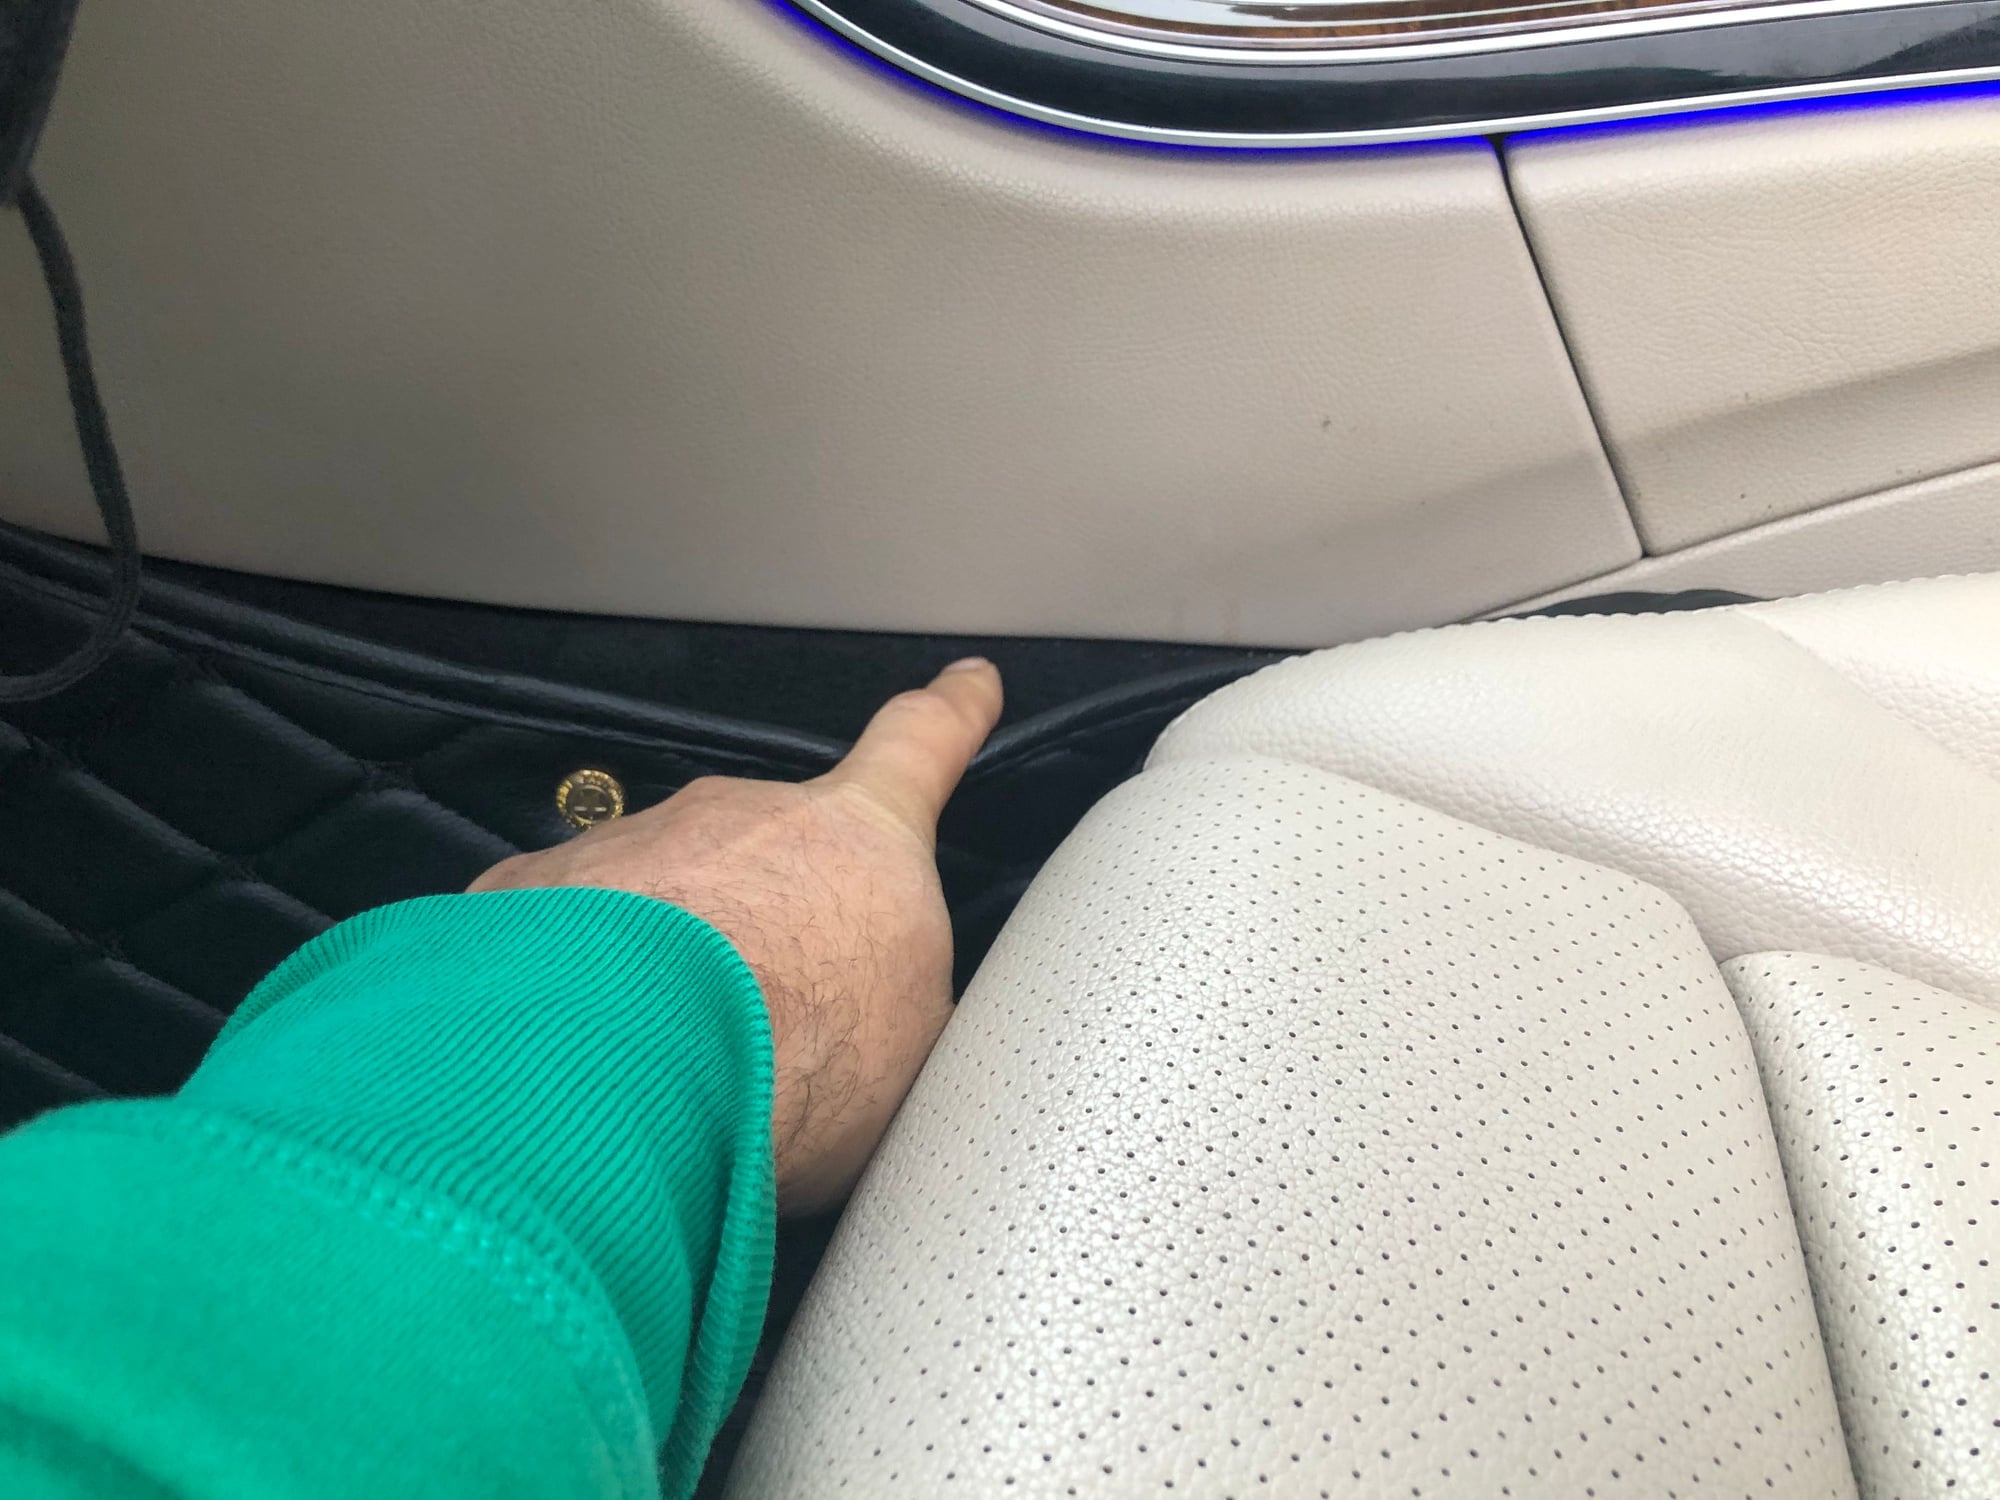 HELP, how to remove the rear seat cover - MBWorld.org Forums